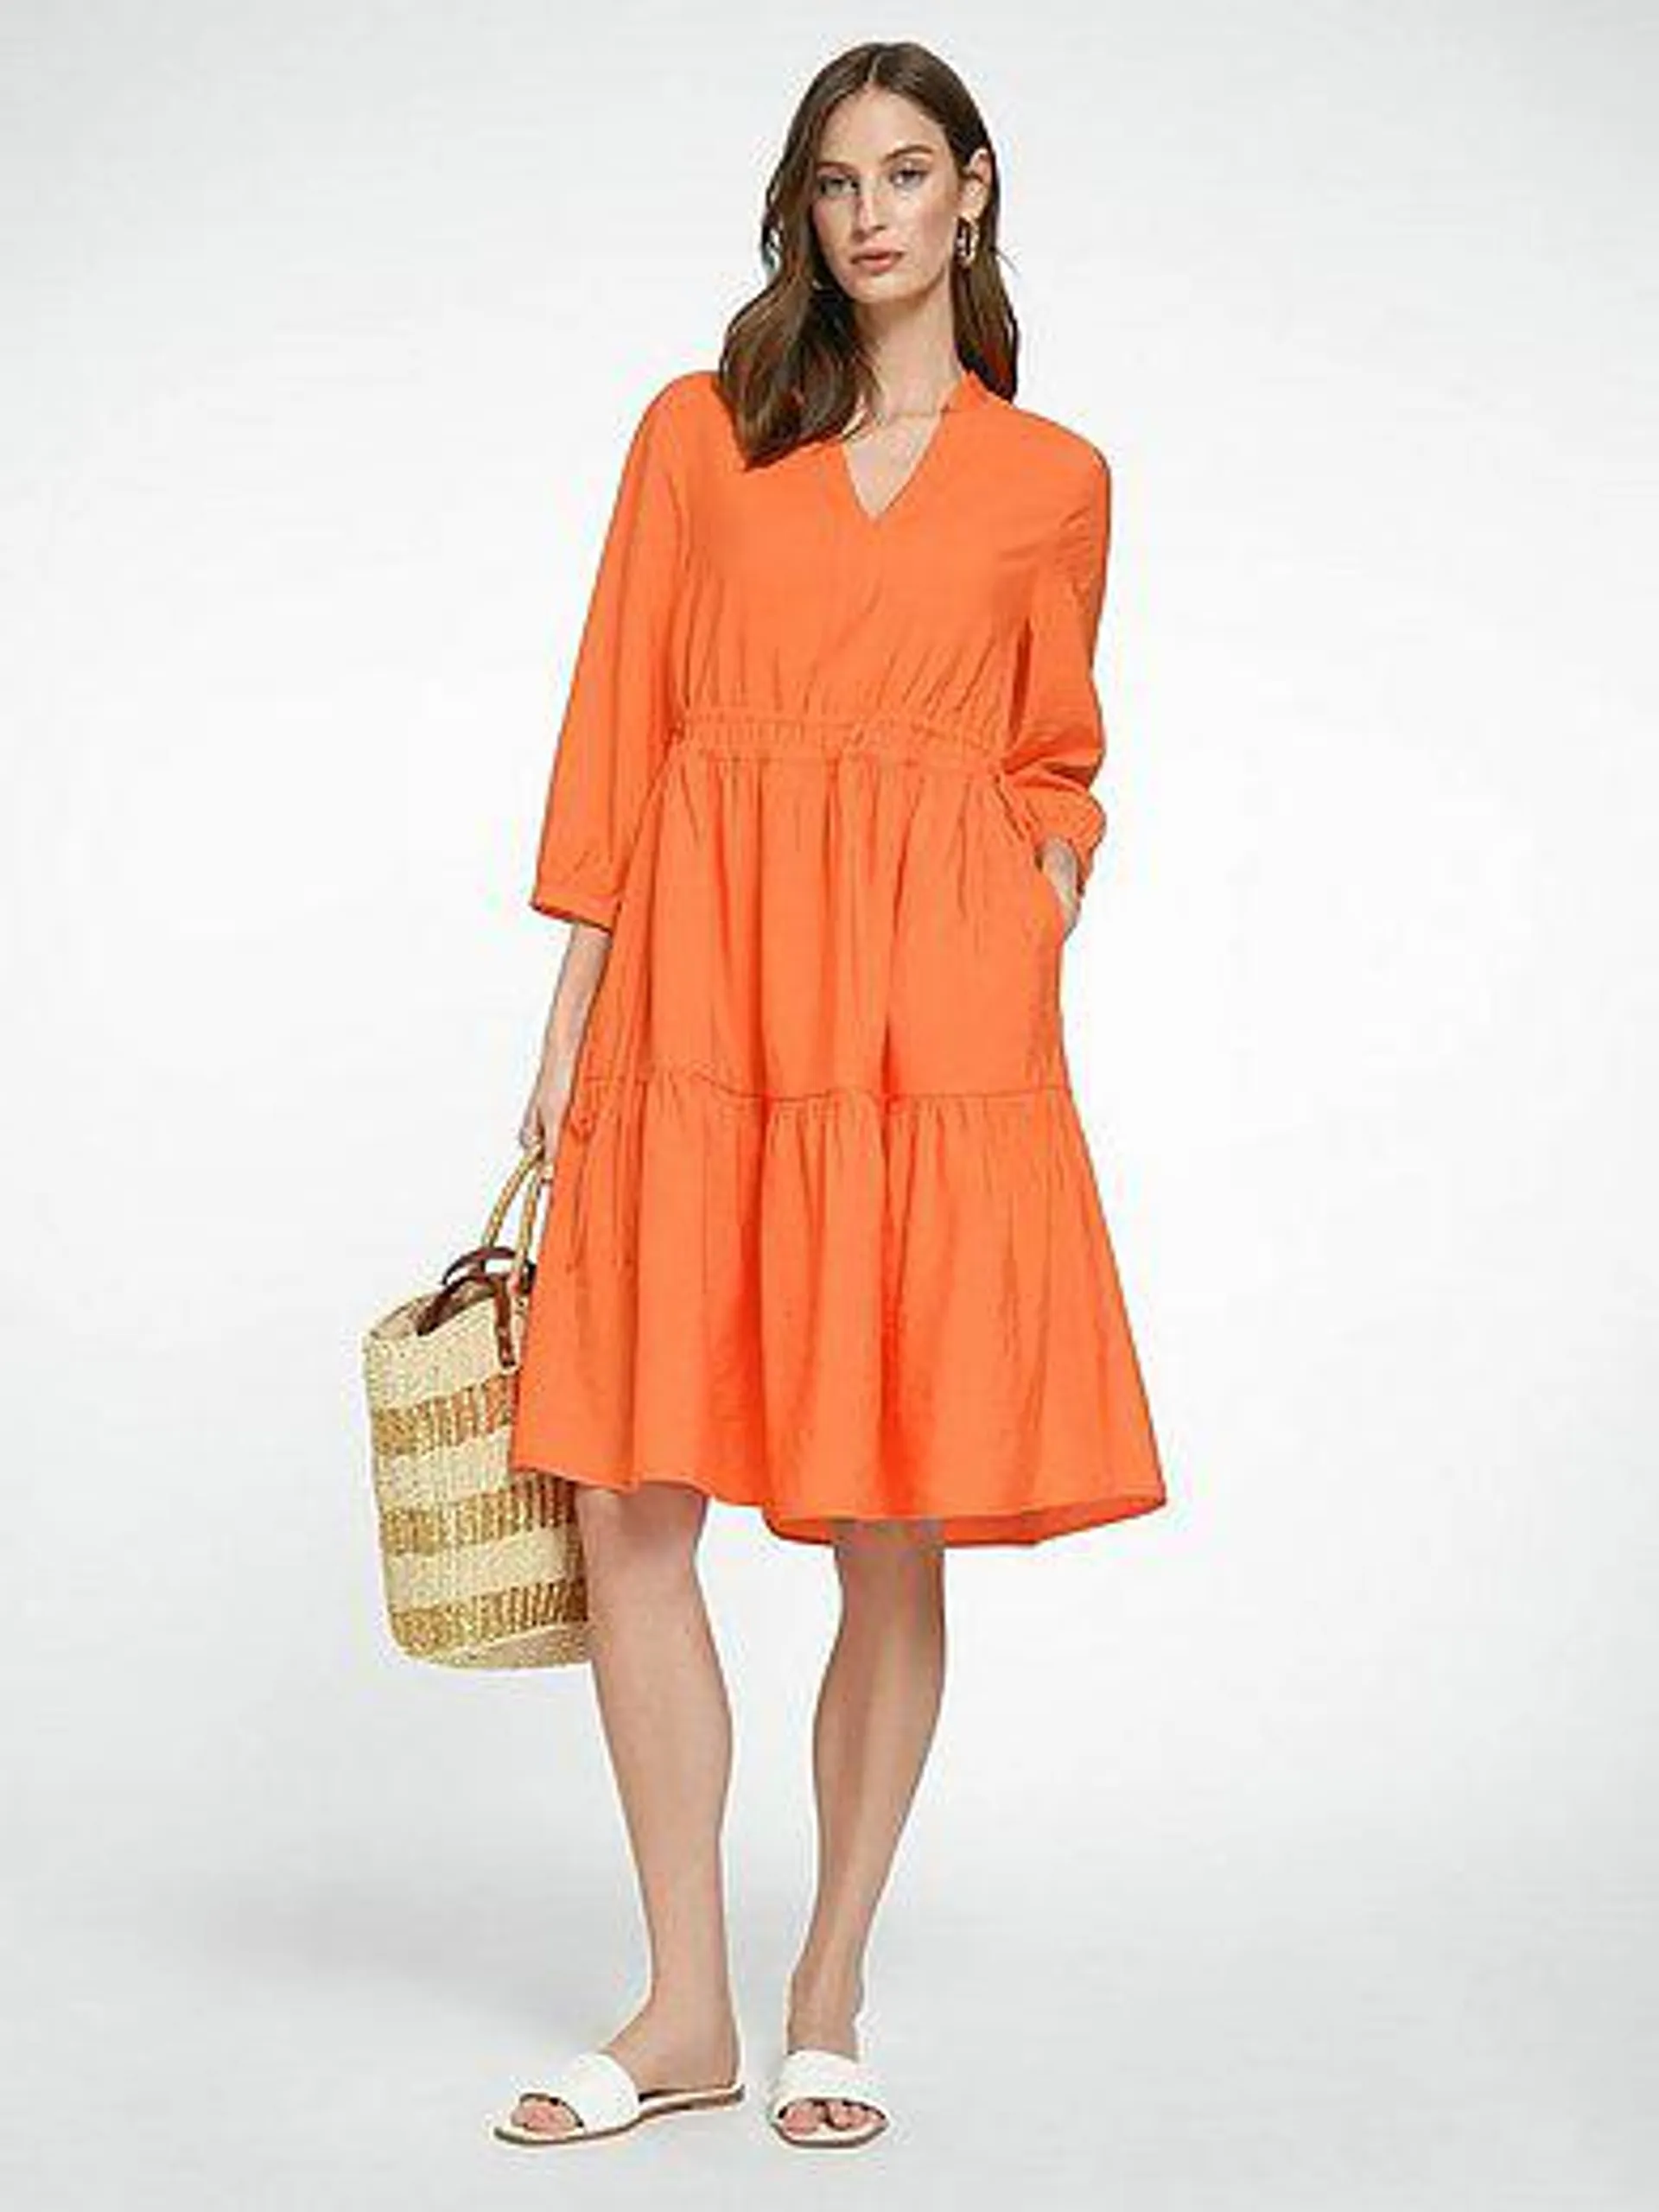 Dress with 3/4-length sleeves